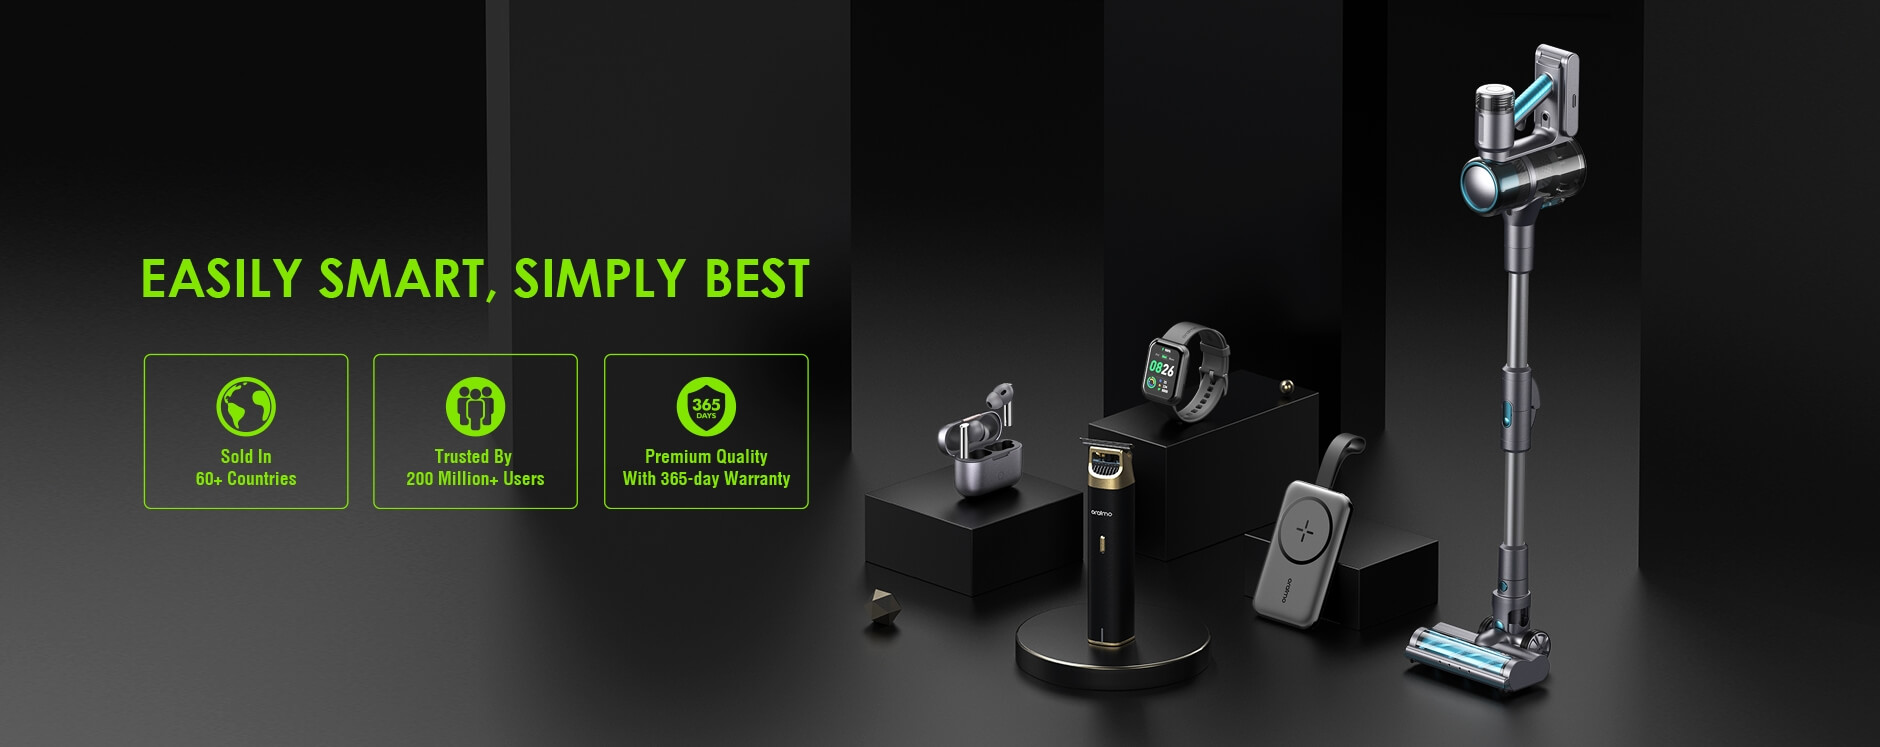 oraimo is sold in over 60 countries and trusted by over 200 million users